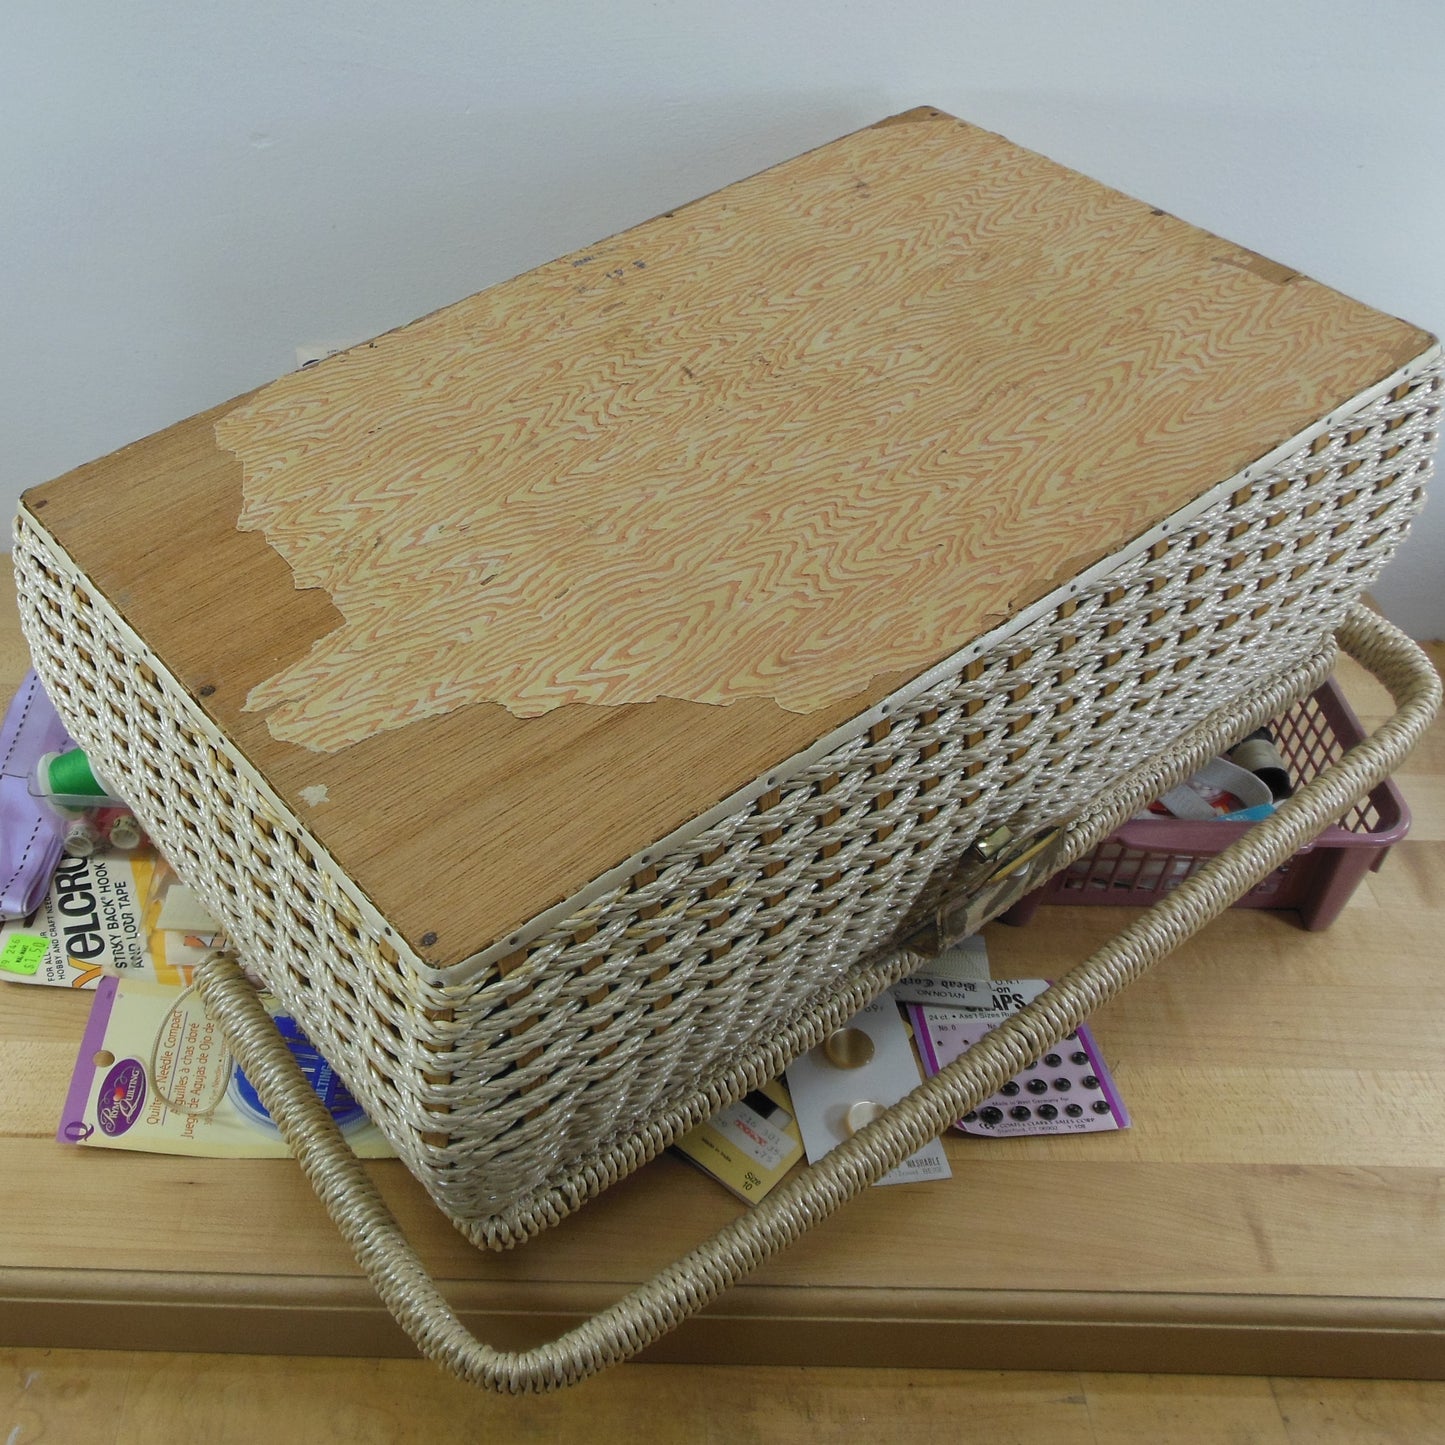 Estate Wicker Woven Sewing Box Basket with Notions Thread Needles